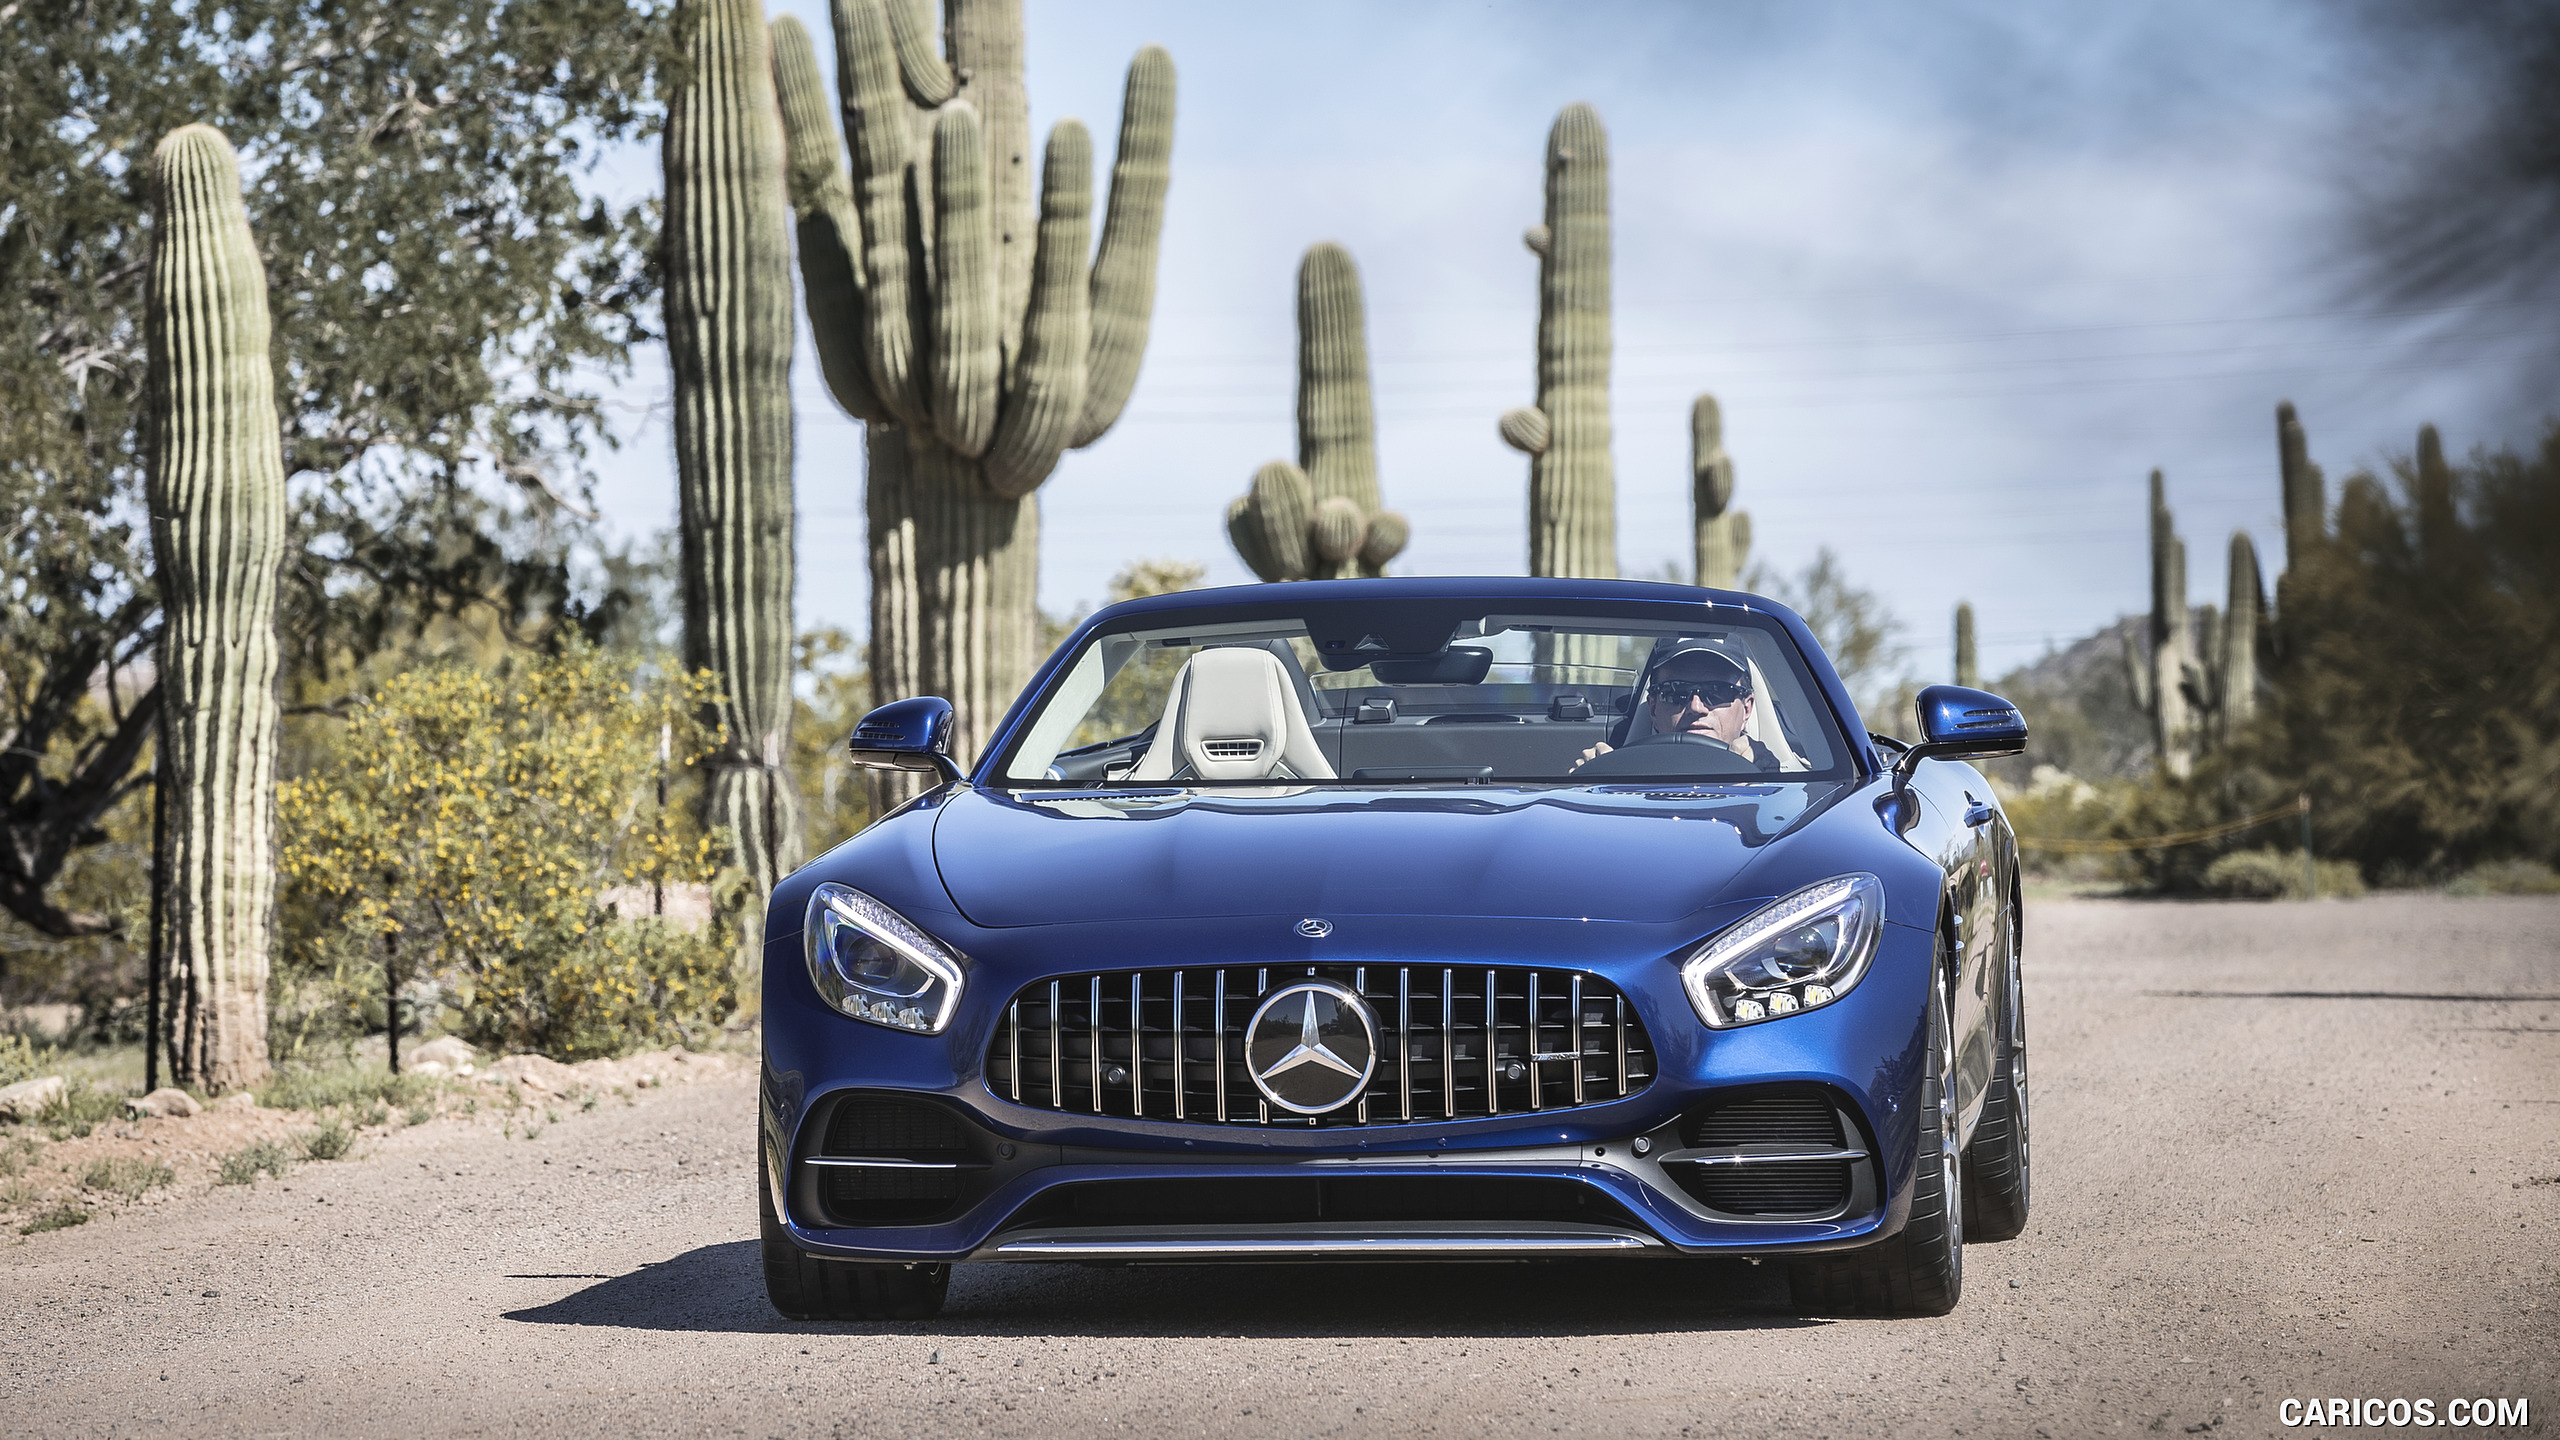 2018 Mercedes-AMG GT Roadster - Front, #148 of 350